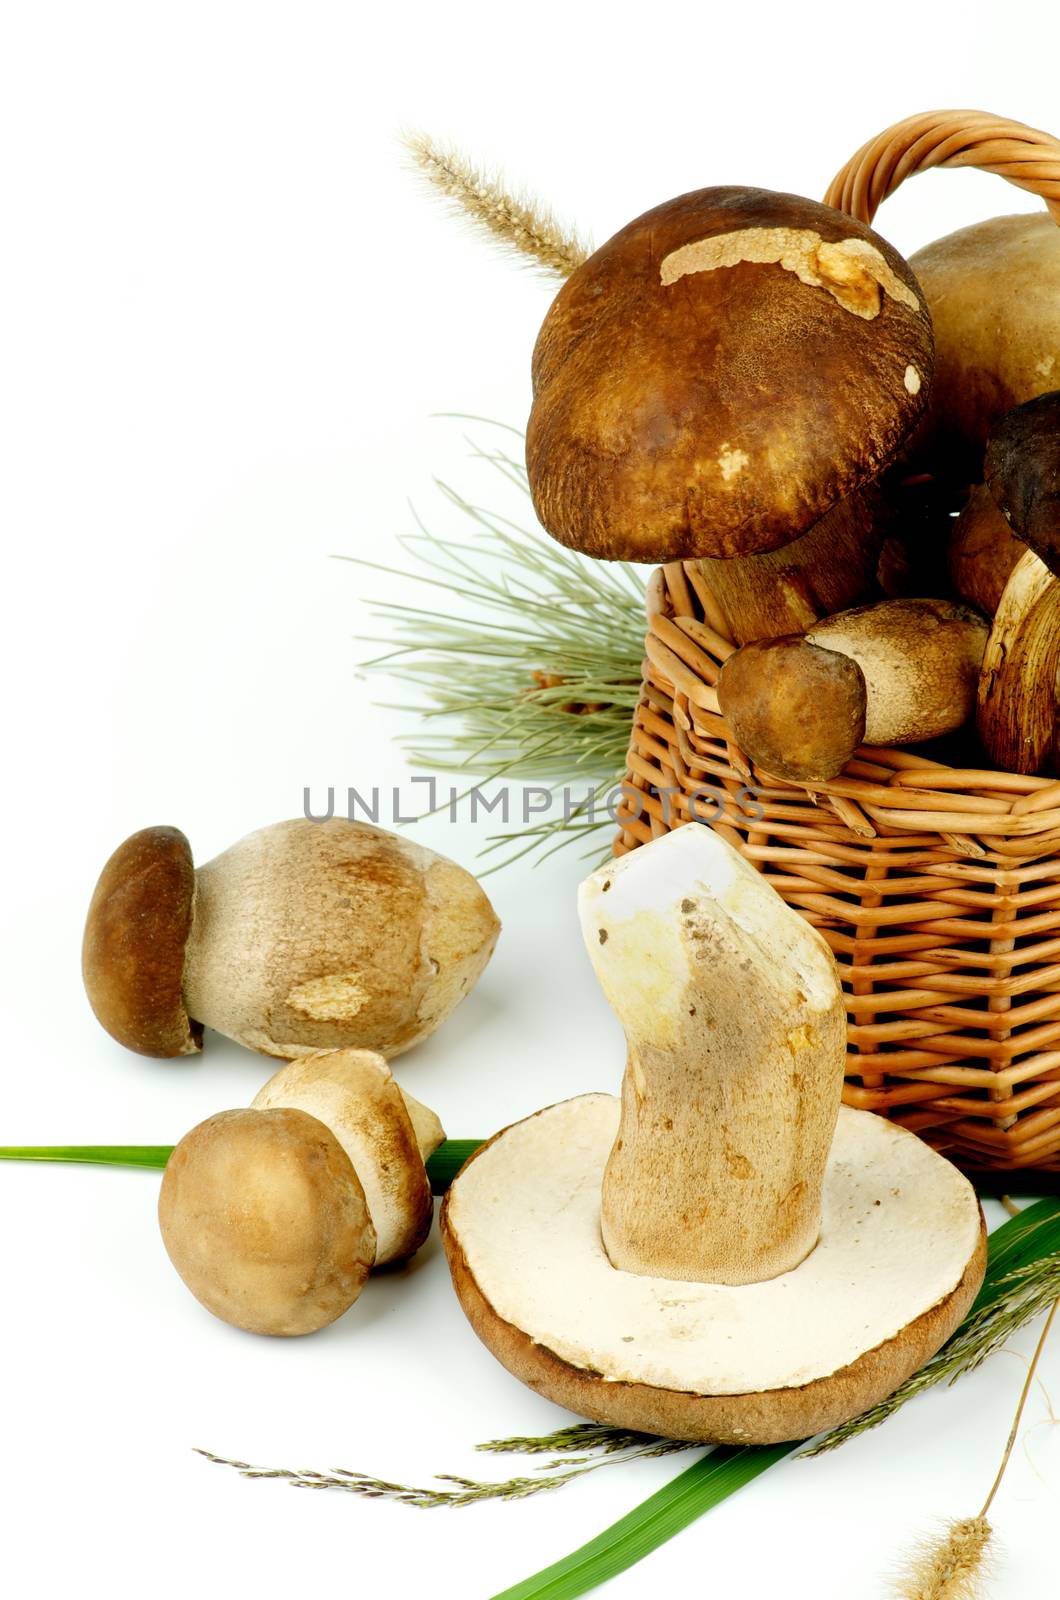 Arrangement of Raw Boletus Mushrooms with Grass and Stems in Wicker Basket closeup on White background